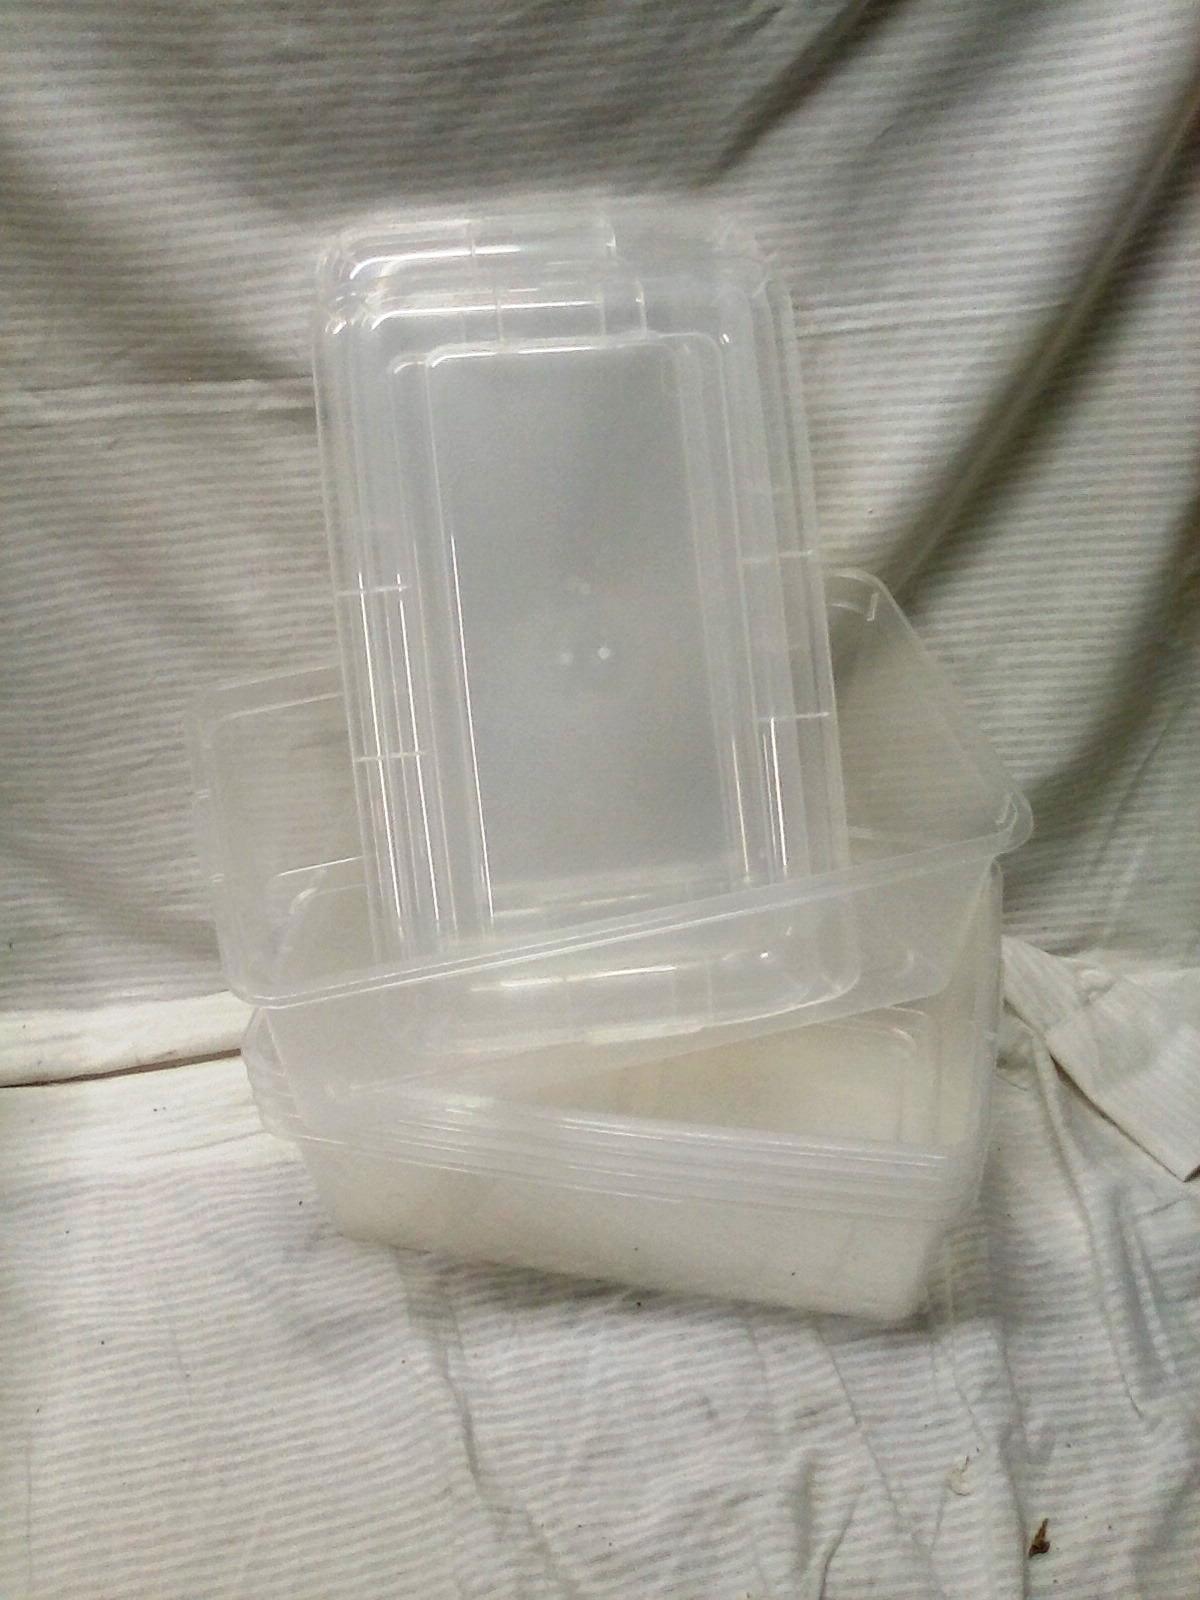 Qty. 5 Iris 12"x6.5"x4.5" Snap Lid Storage Containers